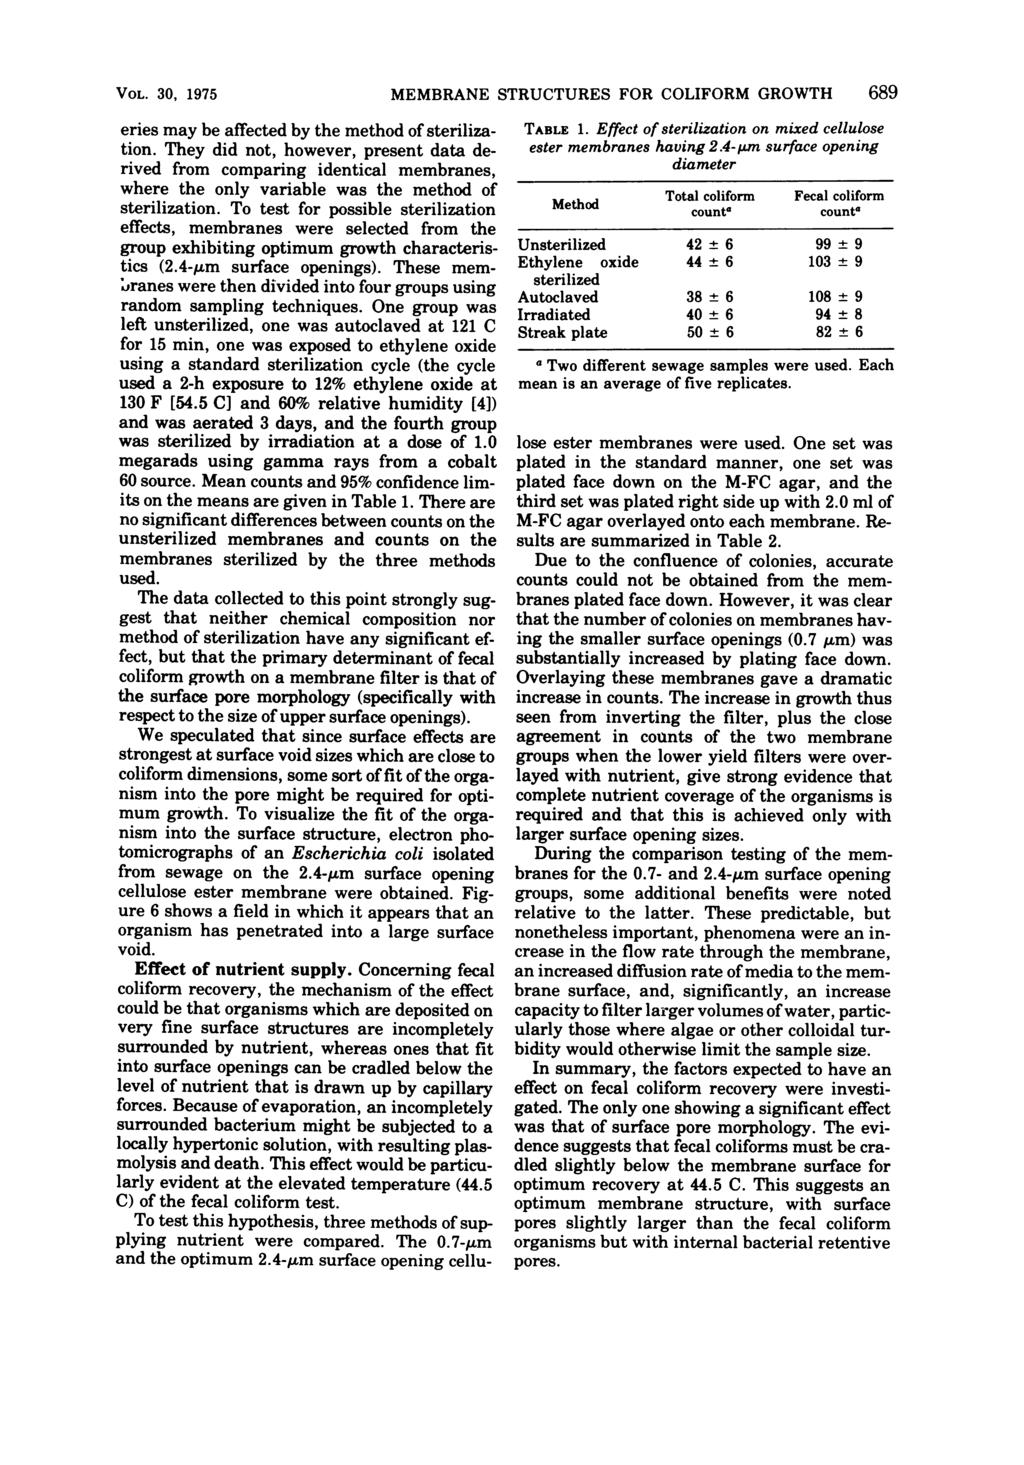 VOL. 3, 1975 eries may be affected by the method of sterilization.